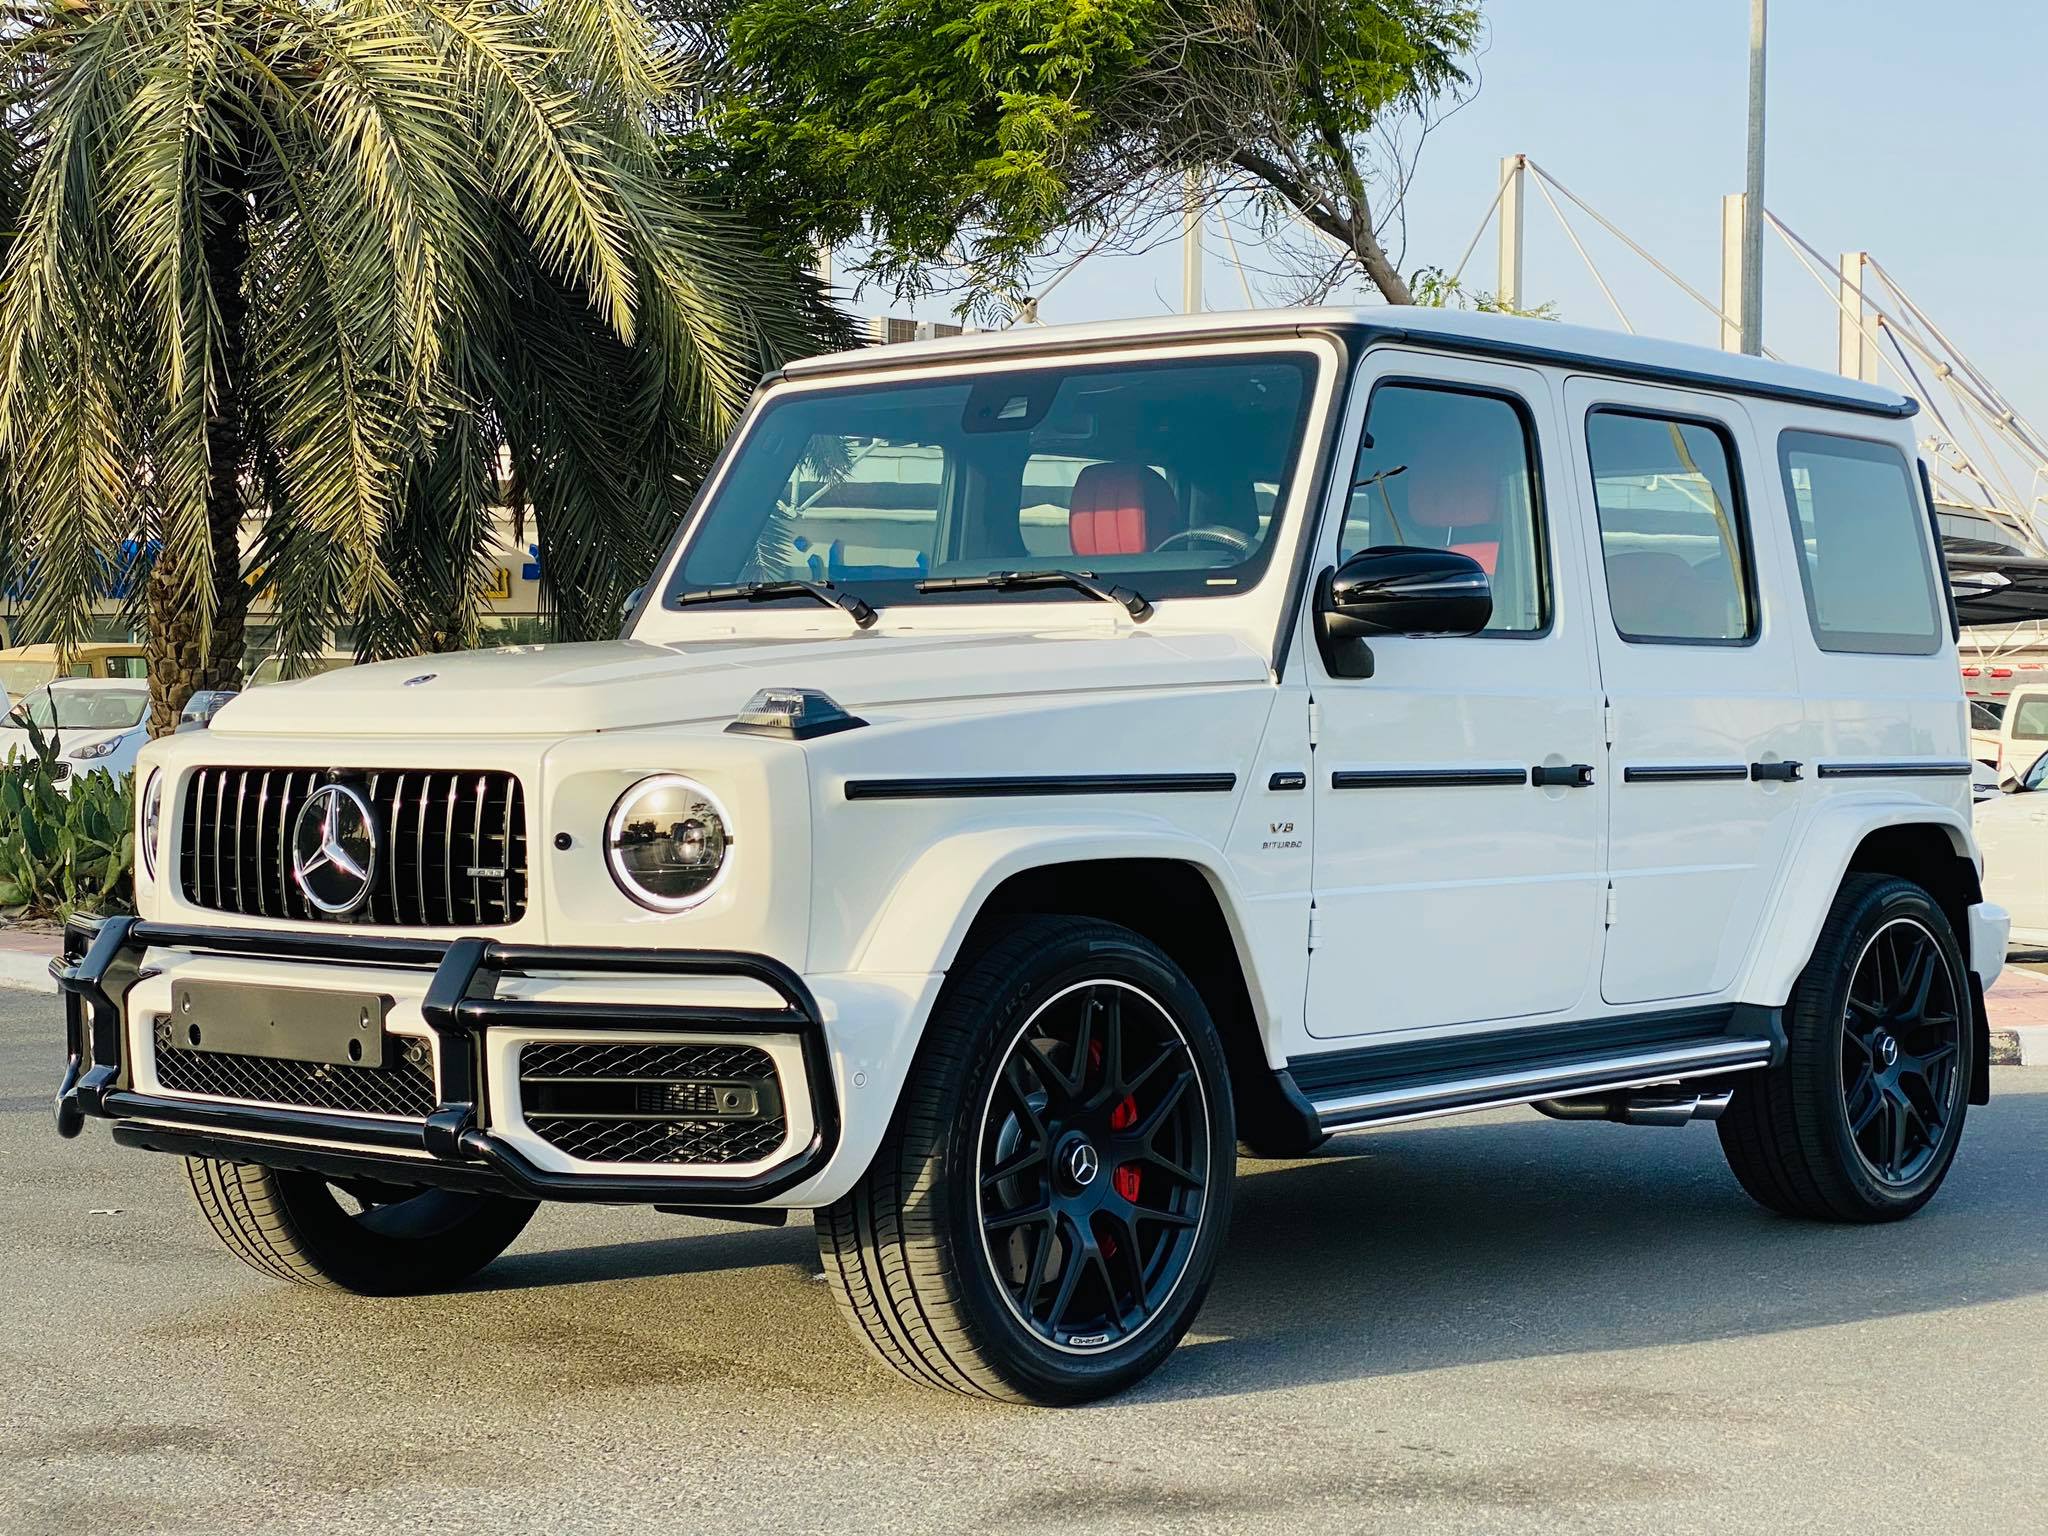 Rs 5 3 Million Highest Registration Fee Paid For Mercedes Amg G63 Made A New Record In Pakistan Startup Pakistan Startups Technology And Business News From Pakistan